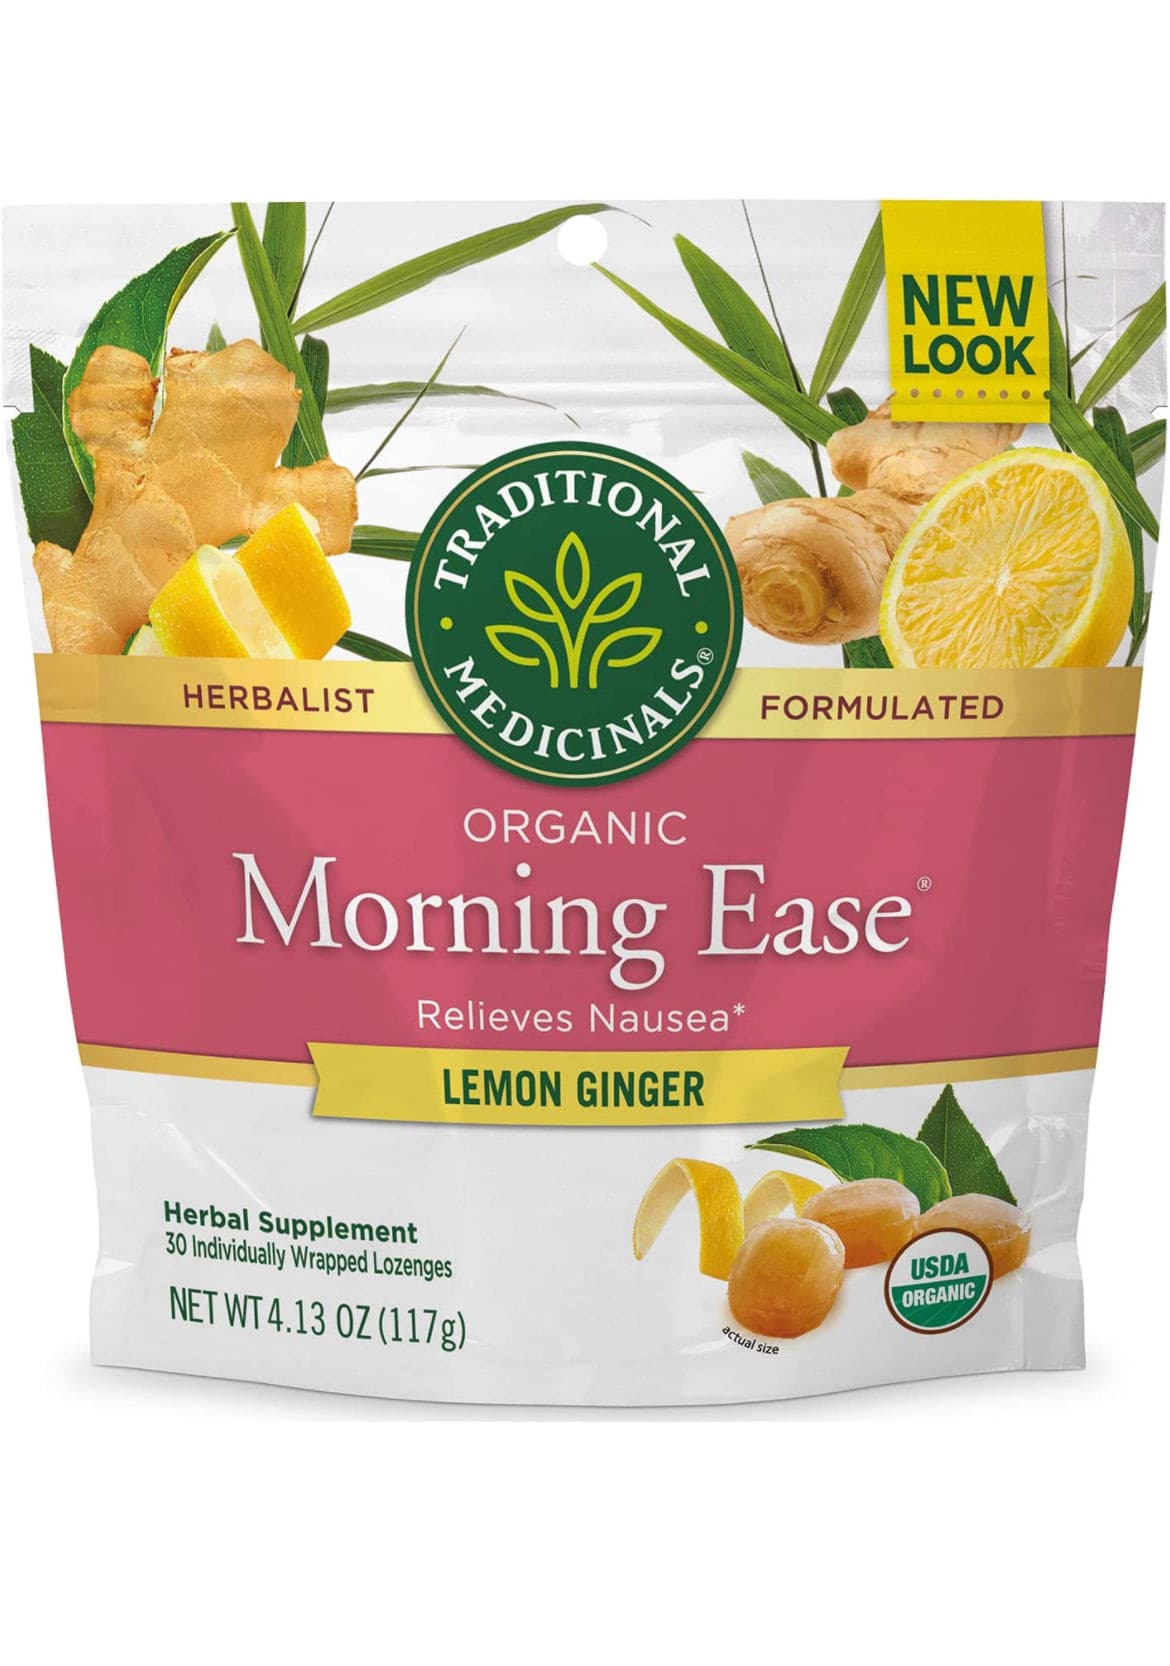 Traditional Medicinals Organic Morning Ease Anti-Nausea Lozenges, Relieves Morning Sickness Associated with Pregnancy, Lemon Ginger (30 count).